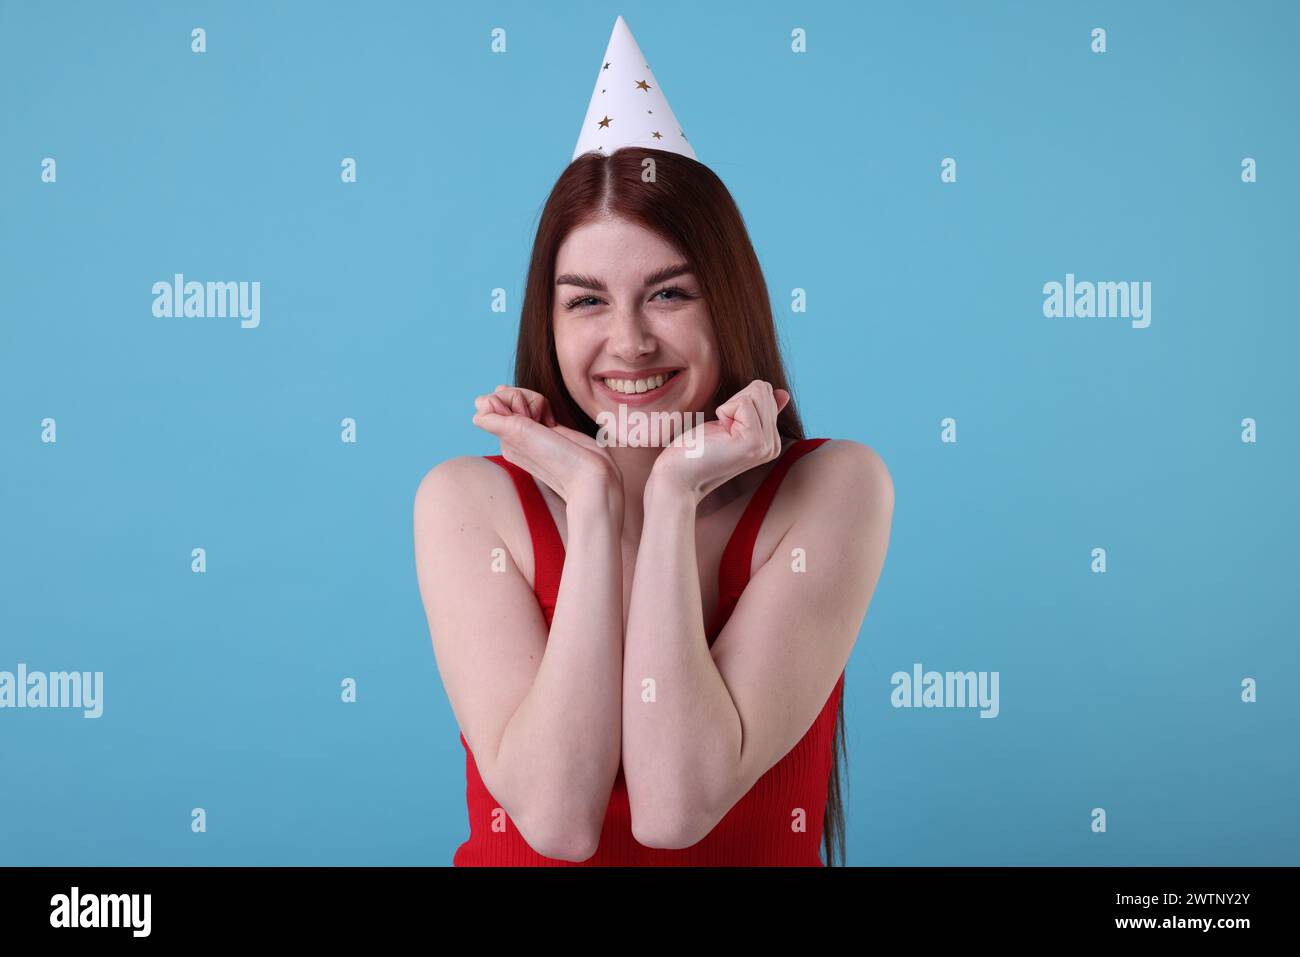 Happy woman in party hat on light blue background Stock Photo